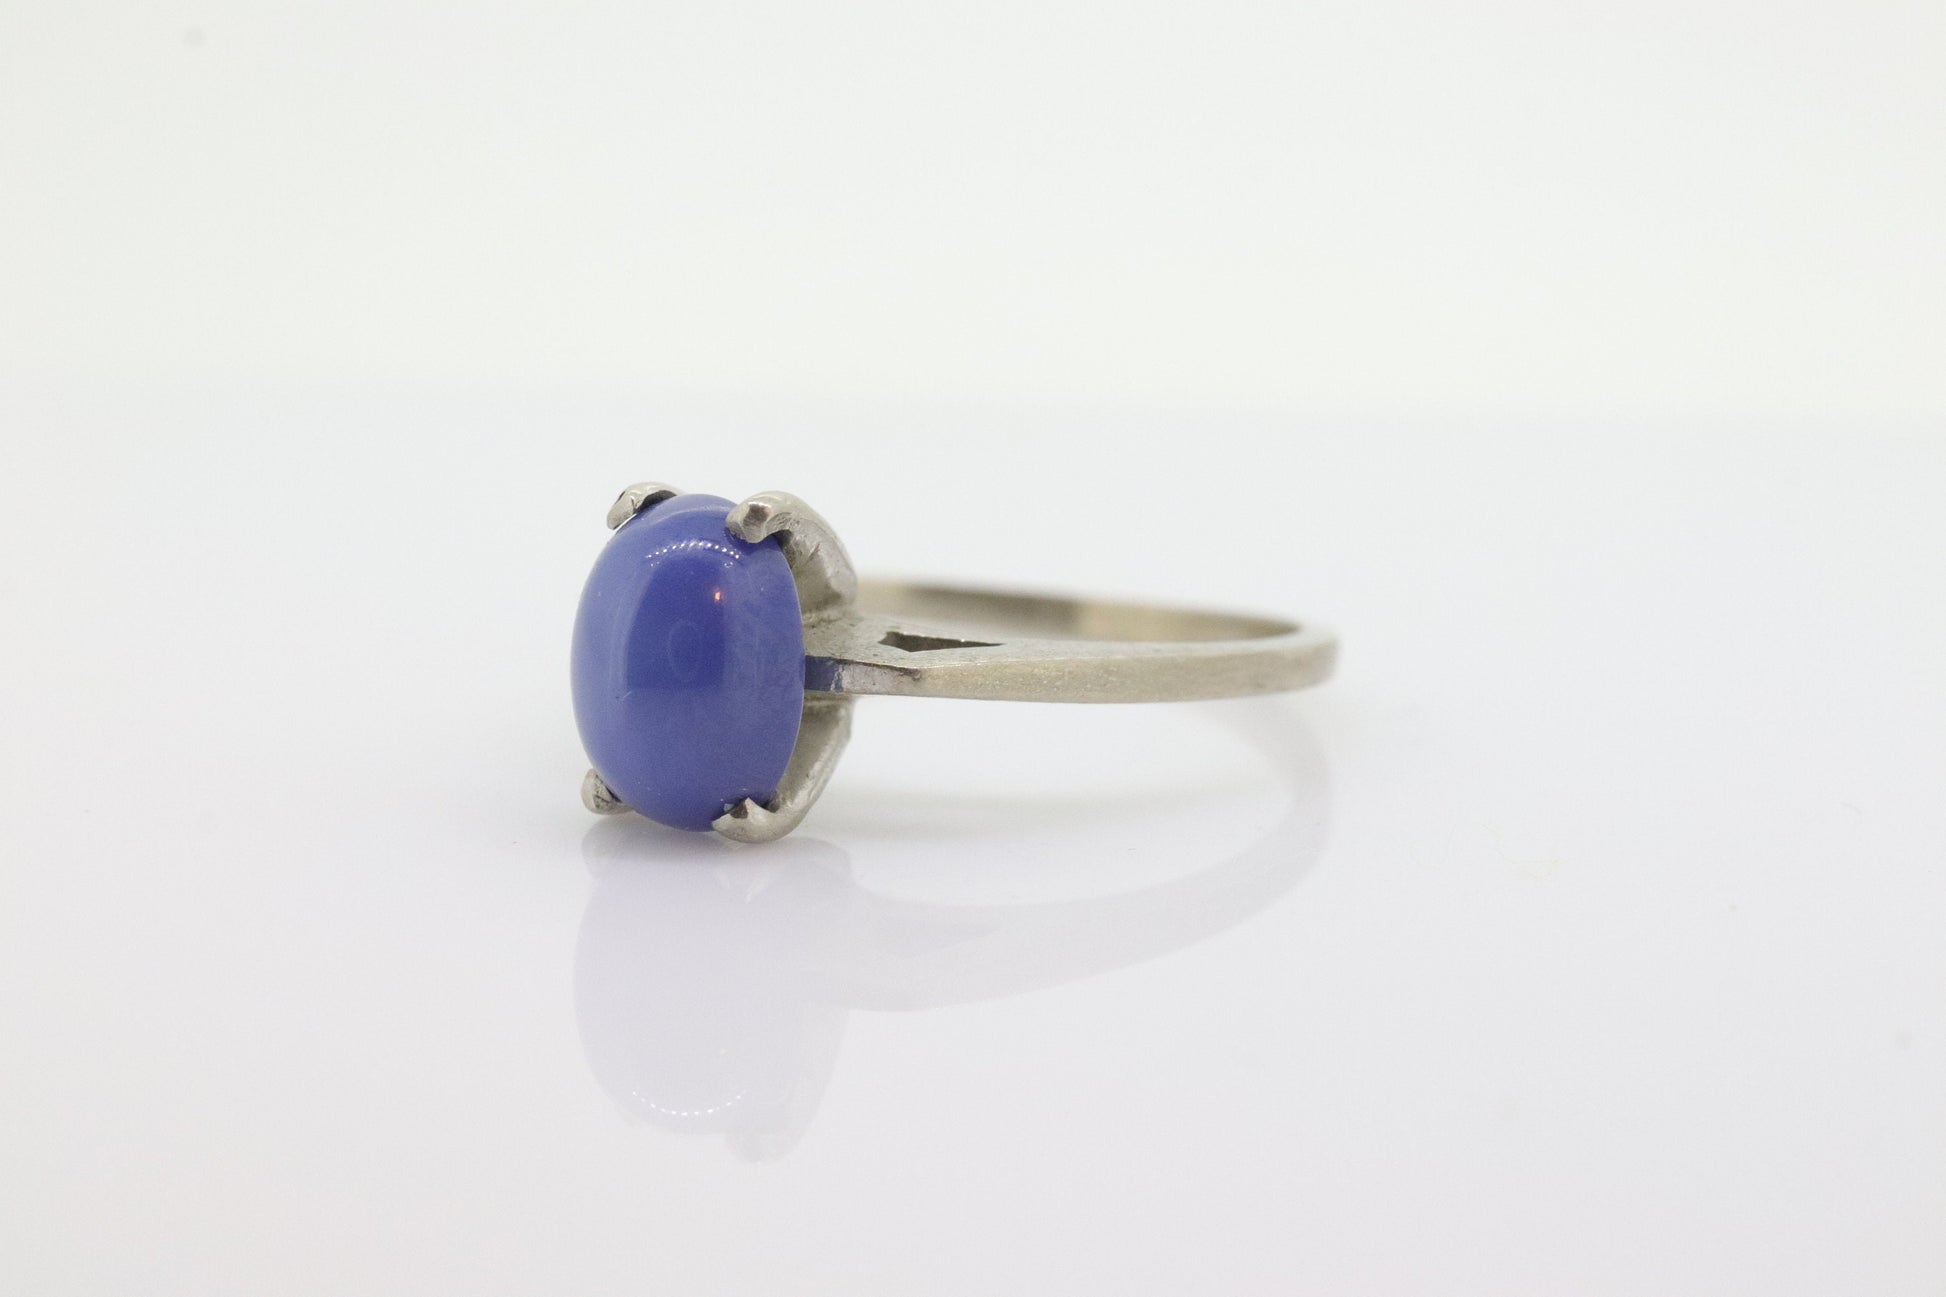 Linde Blue STAR Sapphire Solitaire ring. 10k White gold sapphire solitaire. Dainty Blue Star Sapphire Claw ring. st(72)